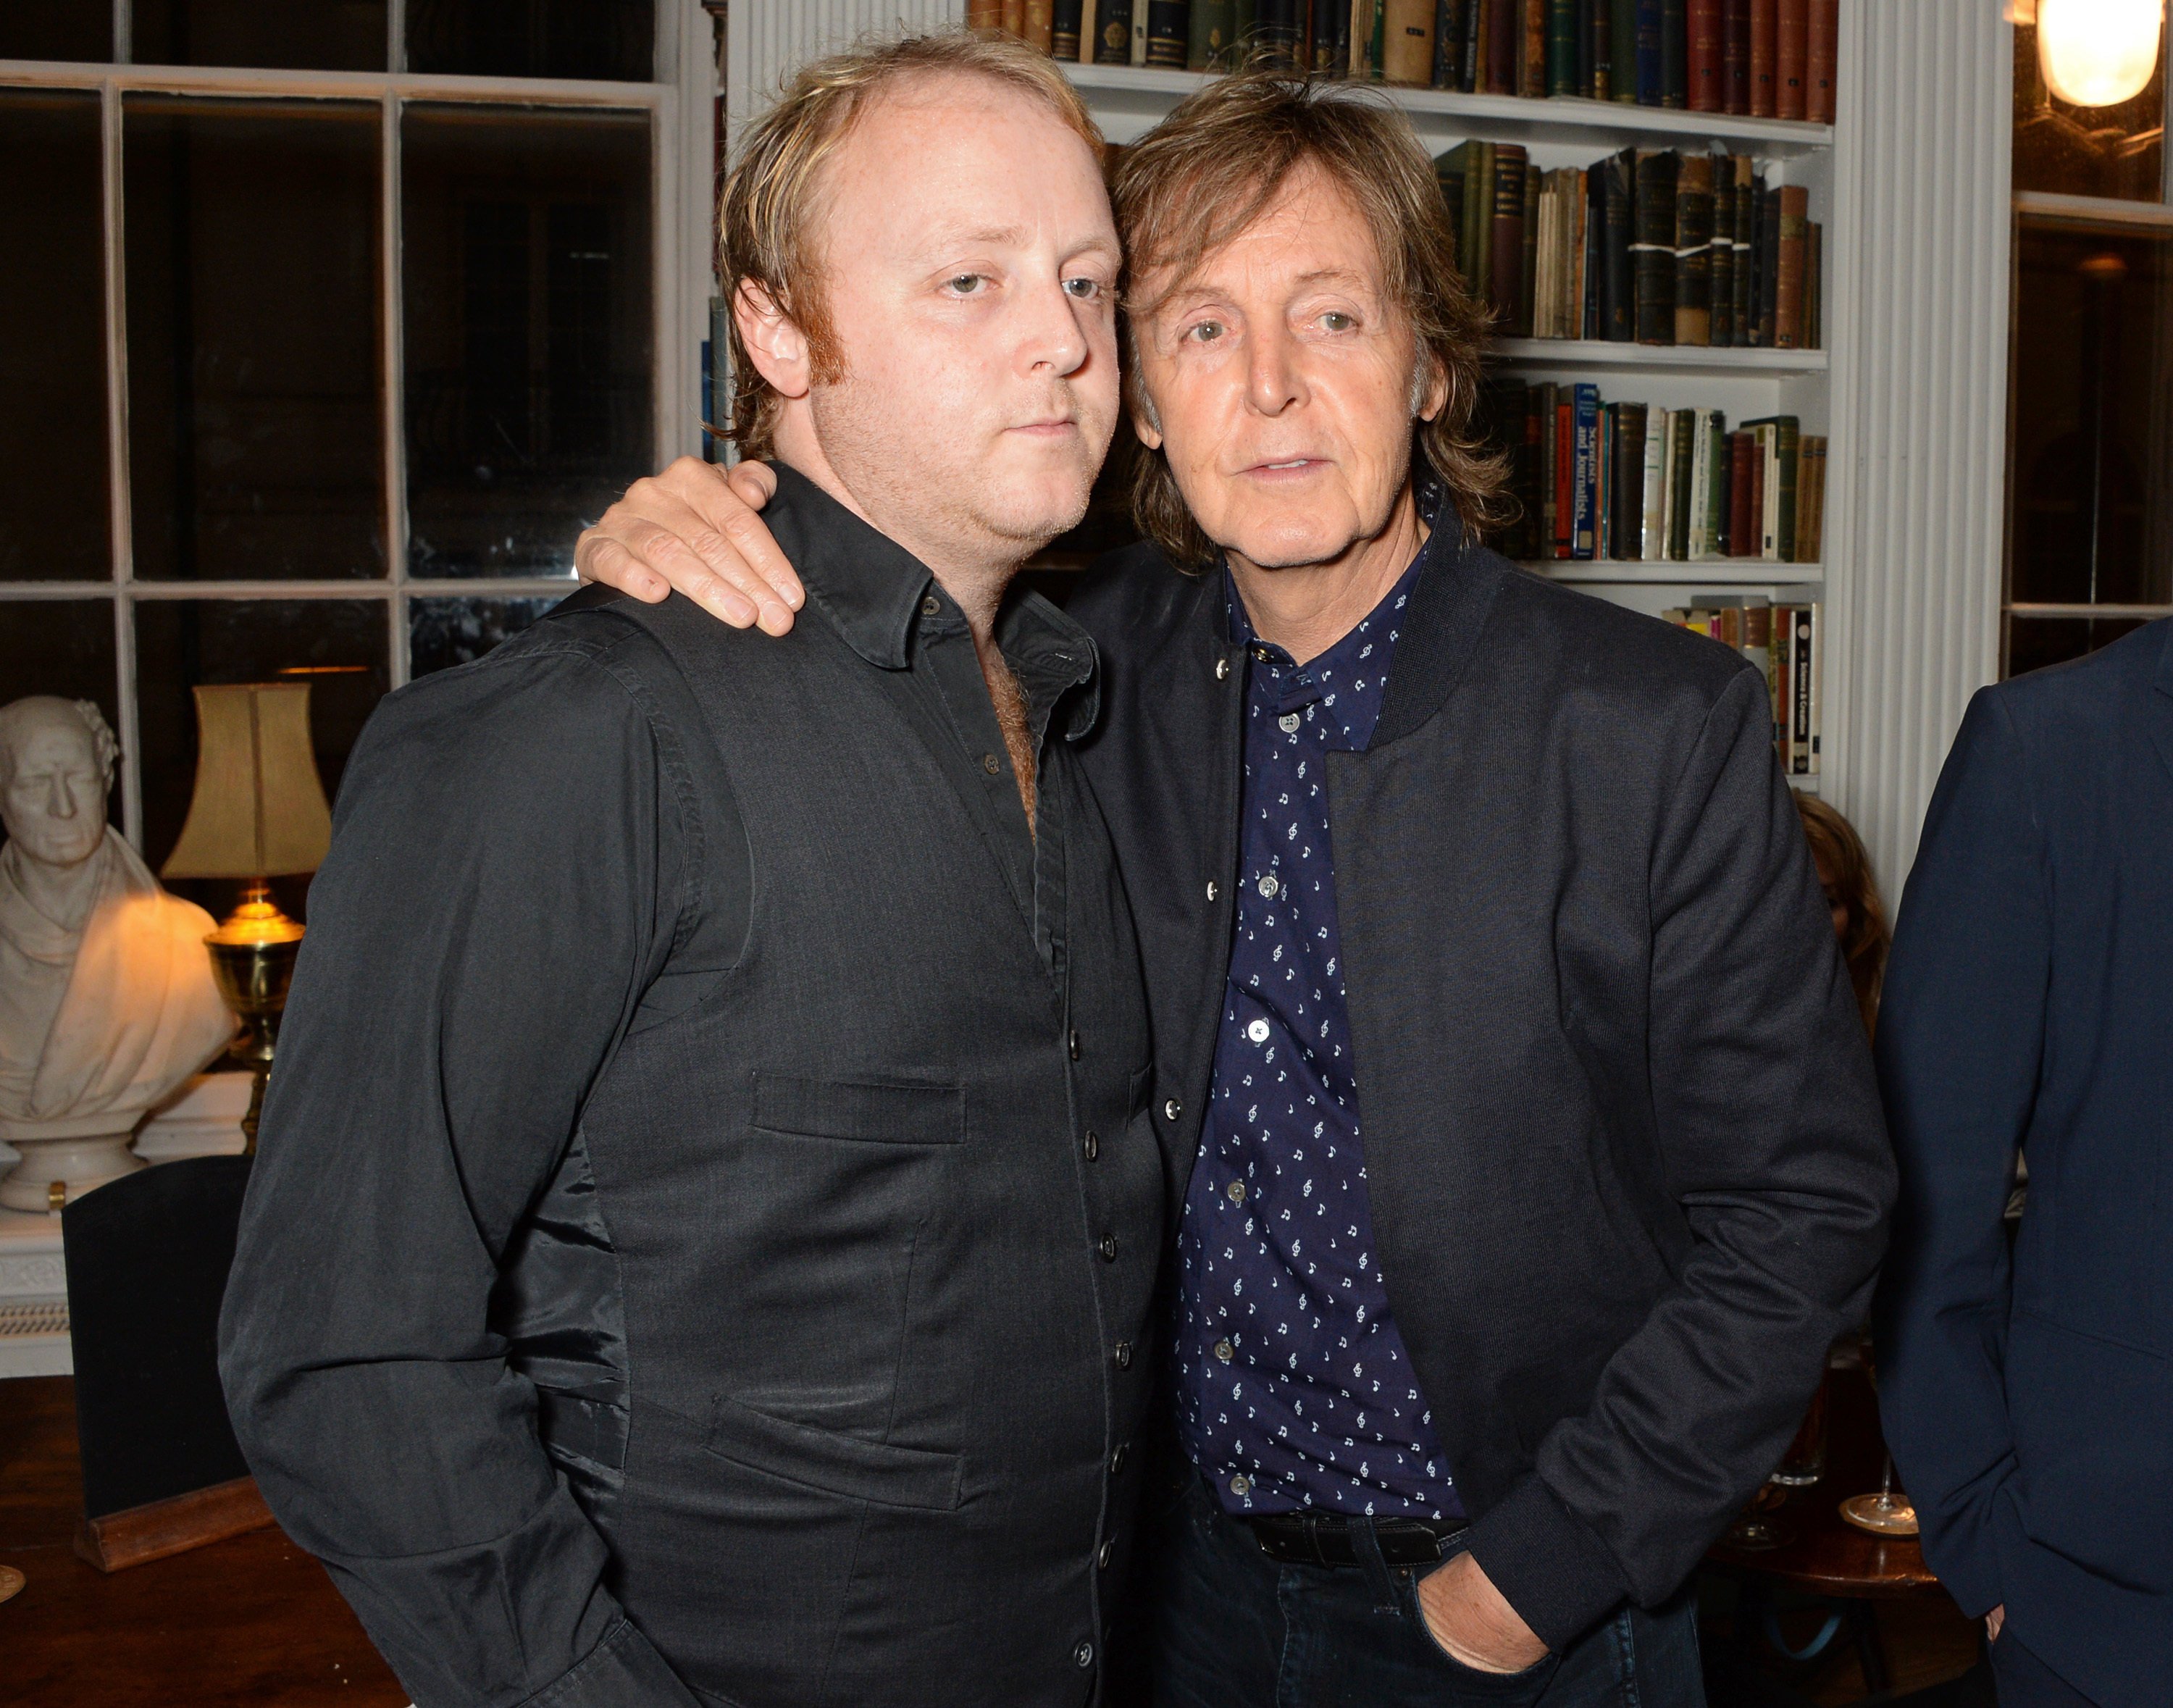 James McCartney and his dad Sir Paul McCartney are both musicians. Photo: Getty Images